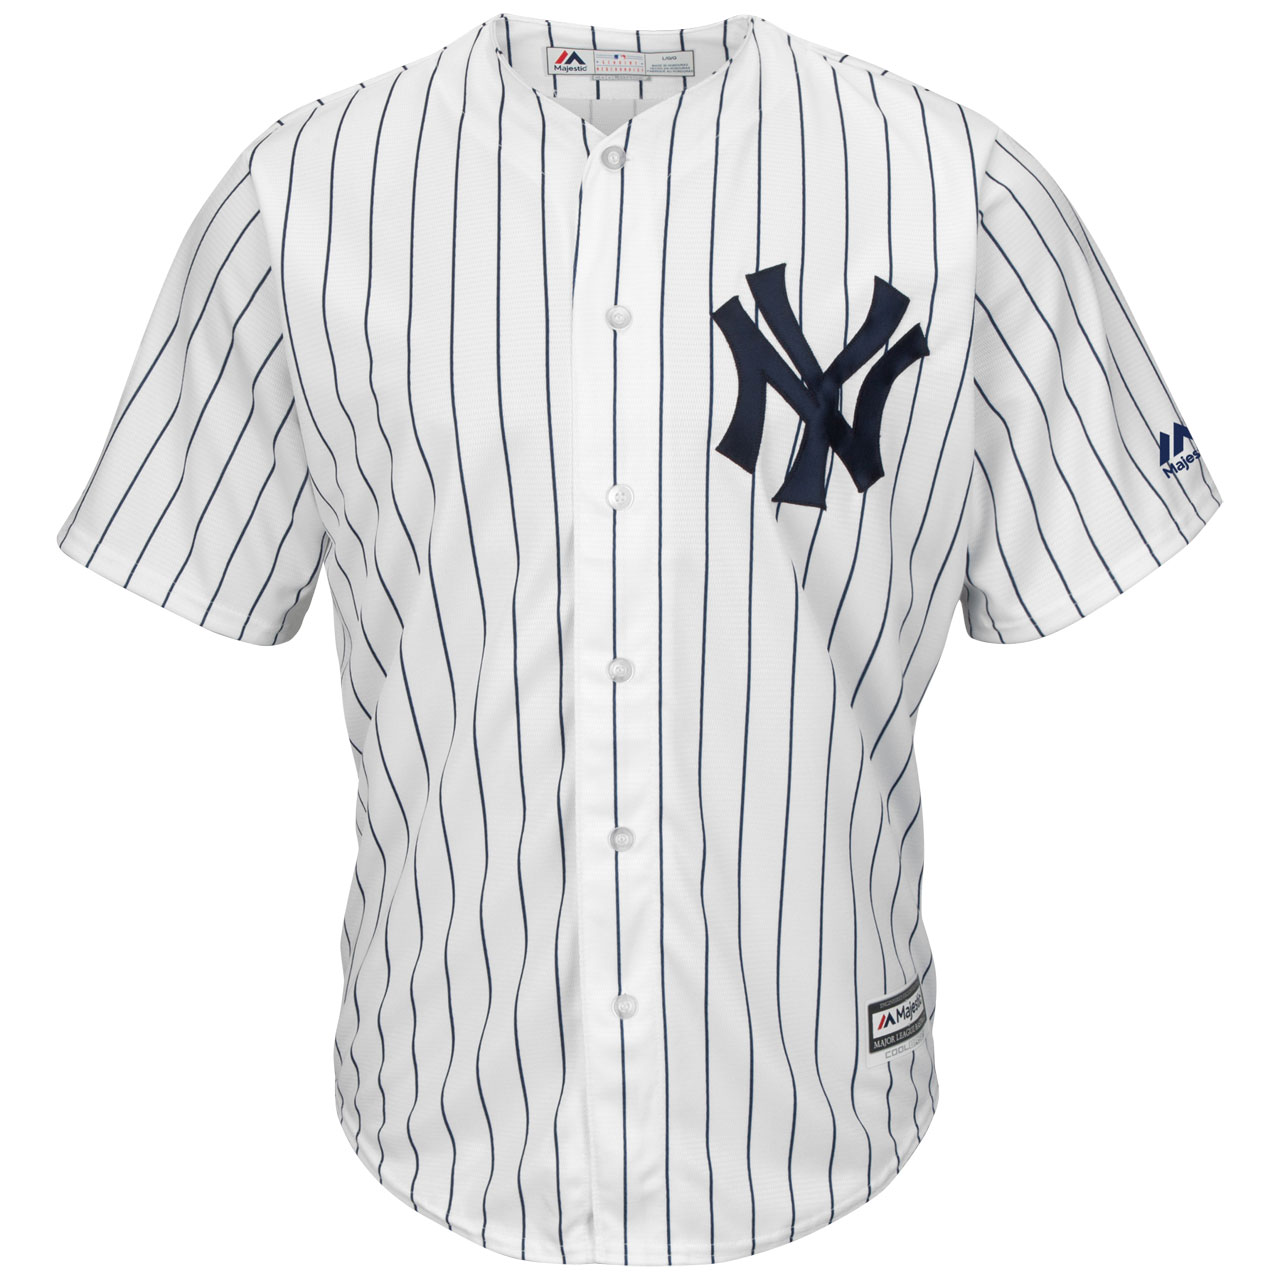 Nike Giancarlo Stanton New York Yankees White Home Authentic Player Jersey